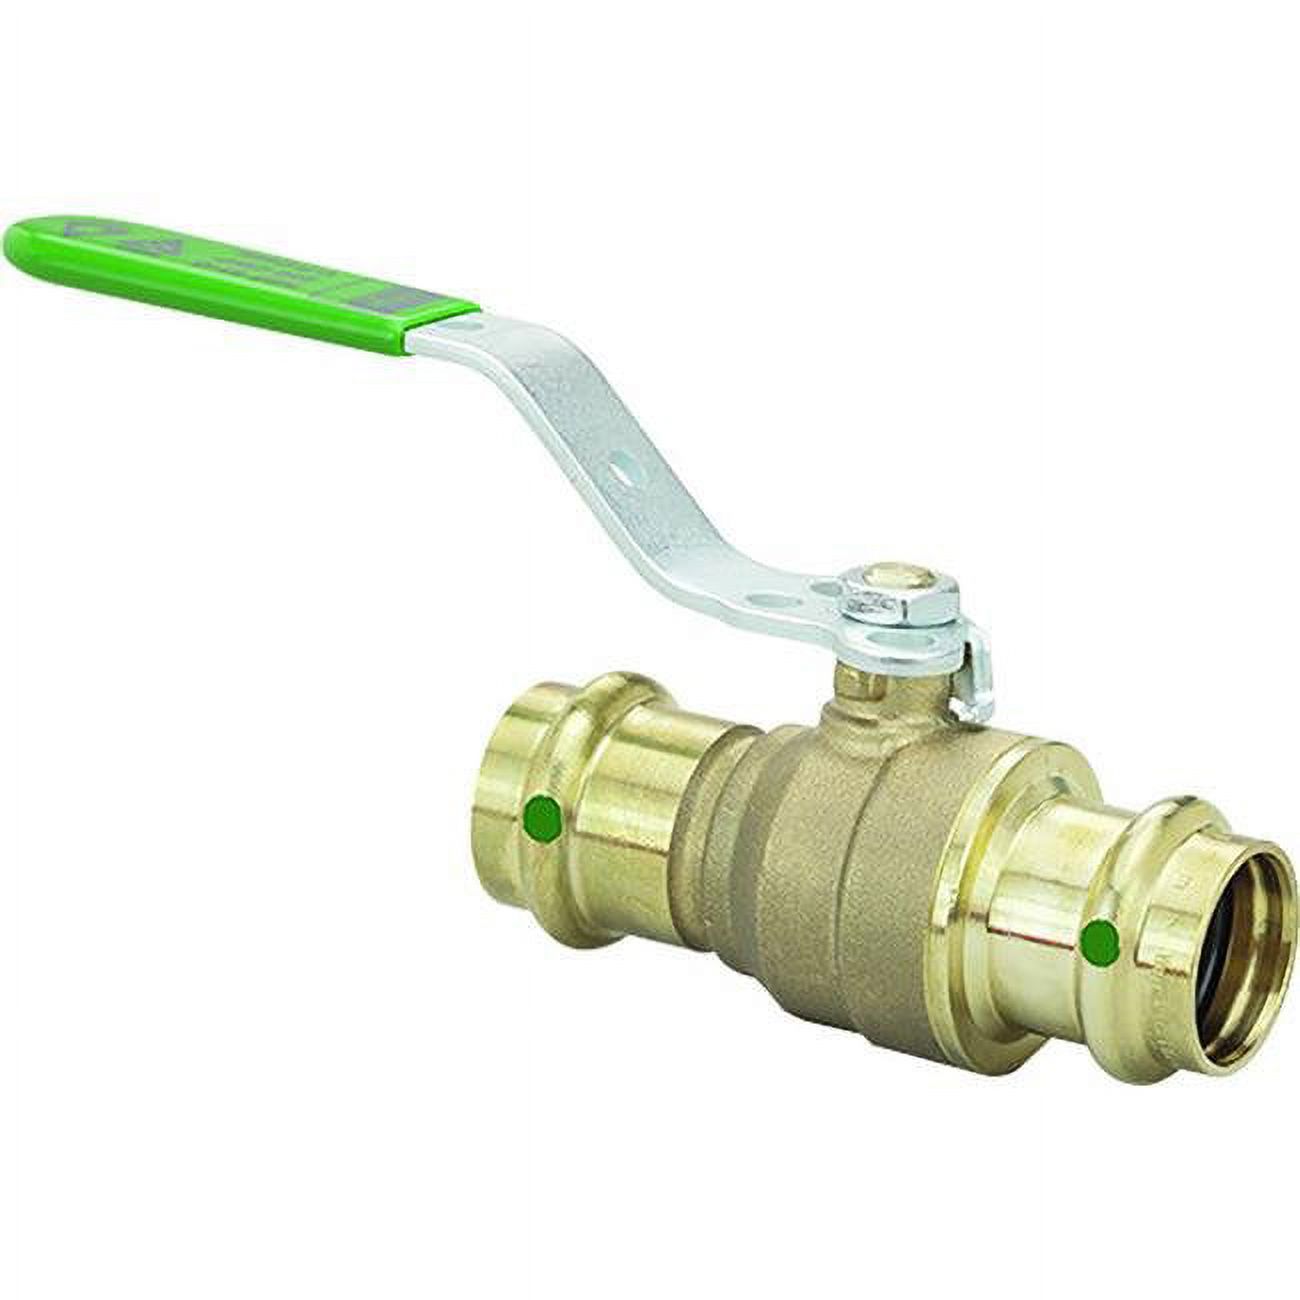 Viega ProPress 1-1/4 Zero Lead Bronze Ball Valve w/Stainless Stem - Double Press Connection - Smart Connect Technology [79938] - image 1 of 2